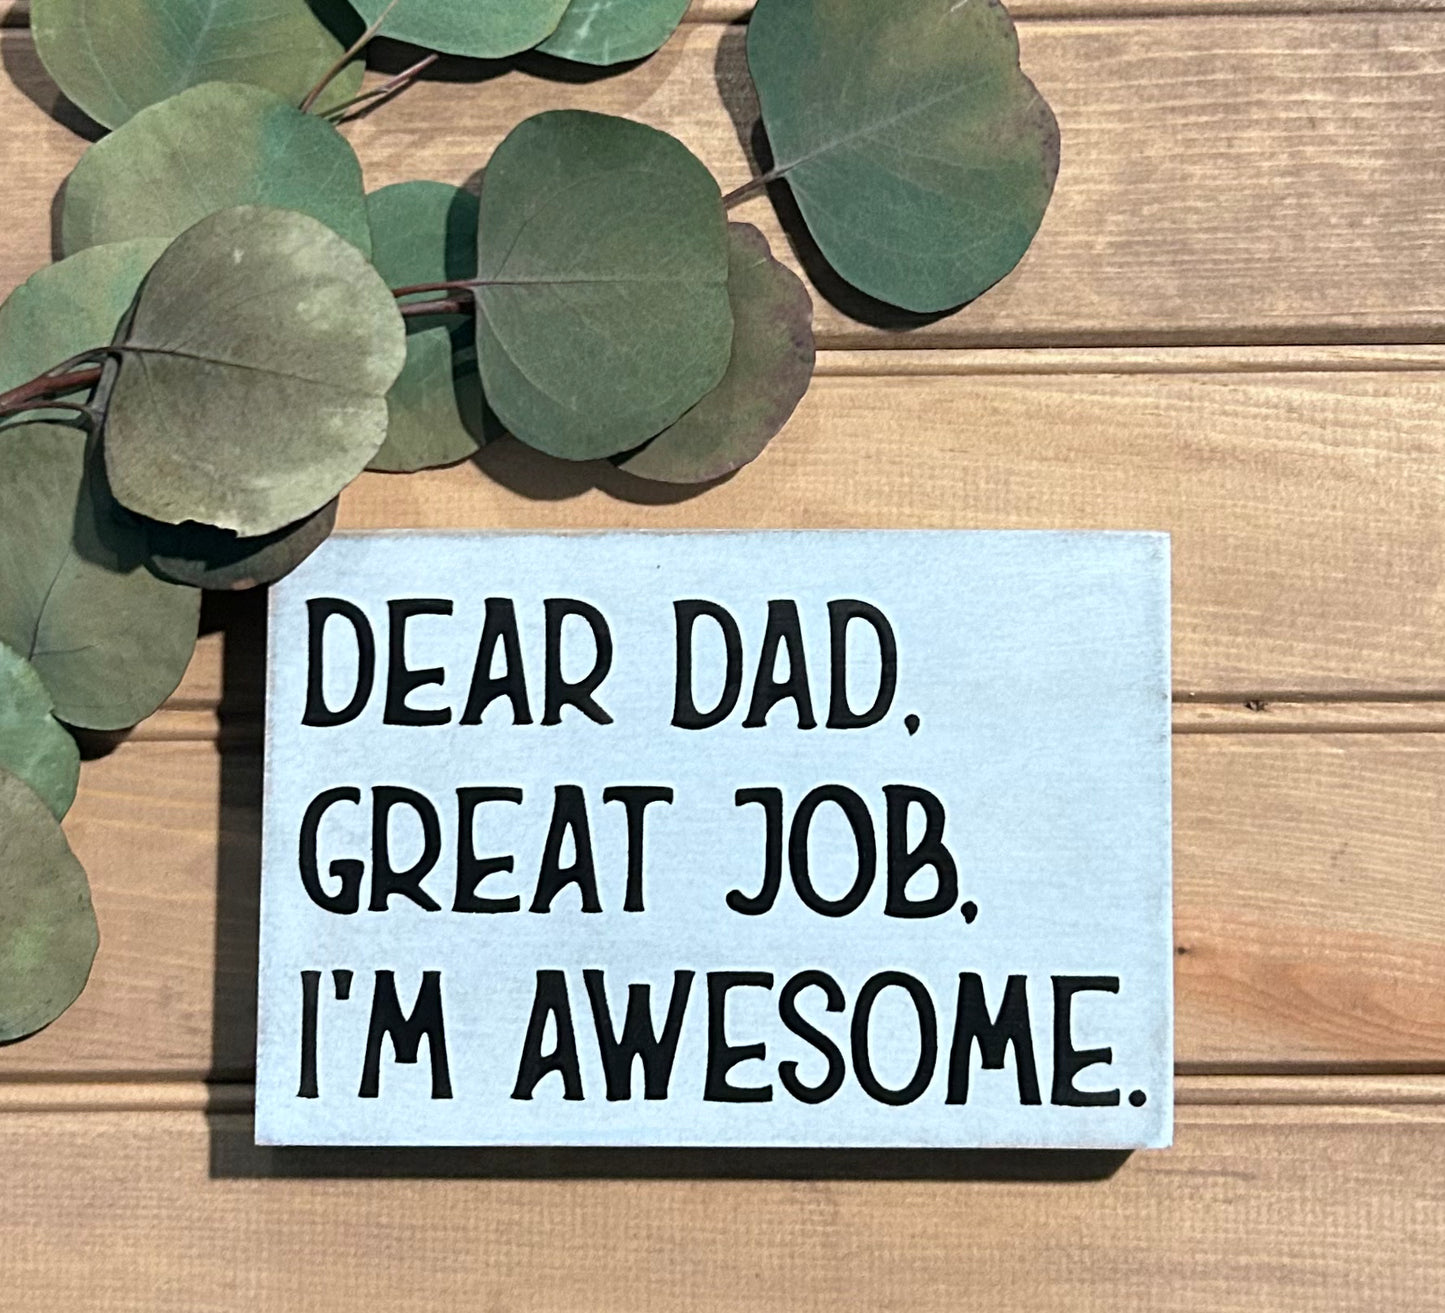 Dear Dad, Great Job, I'm Awesome - Funny Rustic Wood Sign